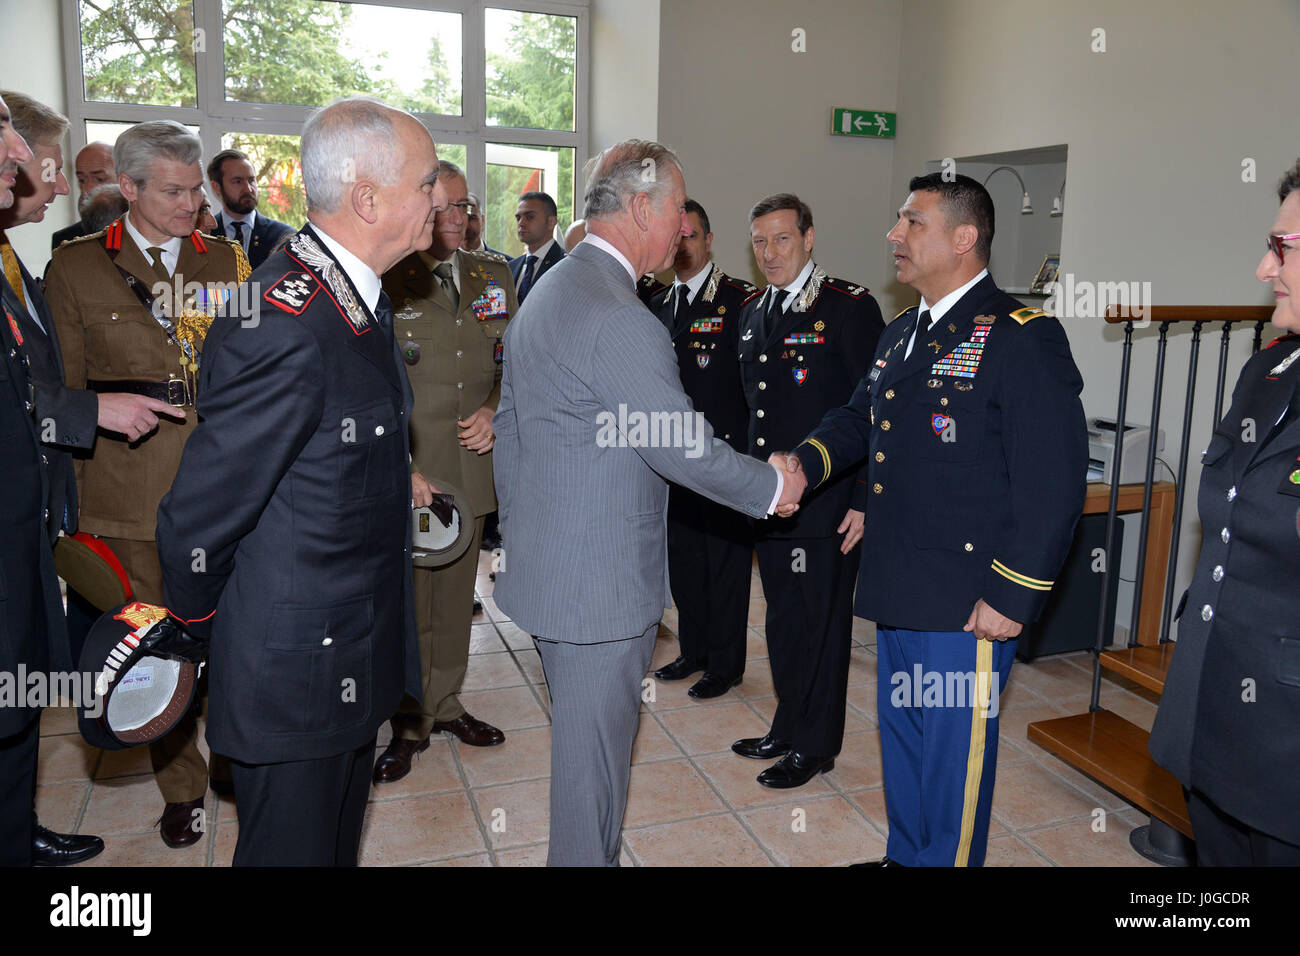 The Royal Highness, Prince Charles, Prince of Wales, meets U.S. Army Col. Darius S. Gallegos, CoESPU deputy director, during visit at Center of Excellence for Stability Police Units (CoESPU) Vicenza, Italy, April 1, 2017. (U.S. Army Photo by Visual Information Specialist Paolo Bovo/released) Stock Photo